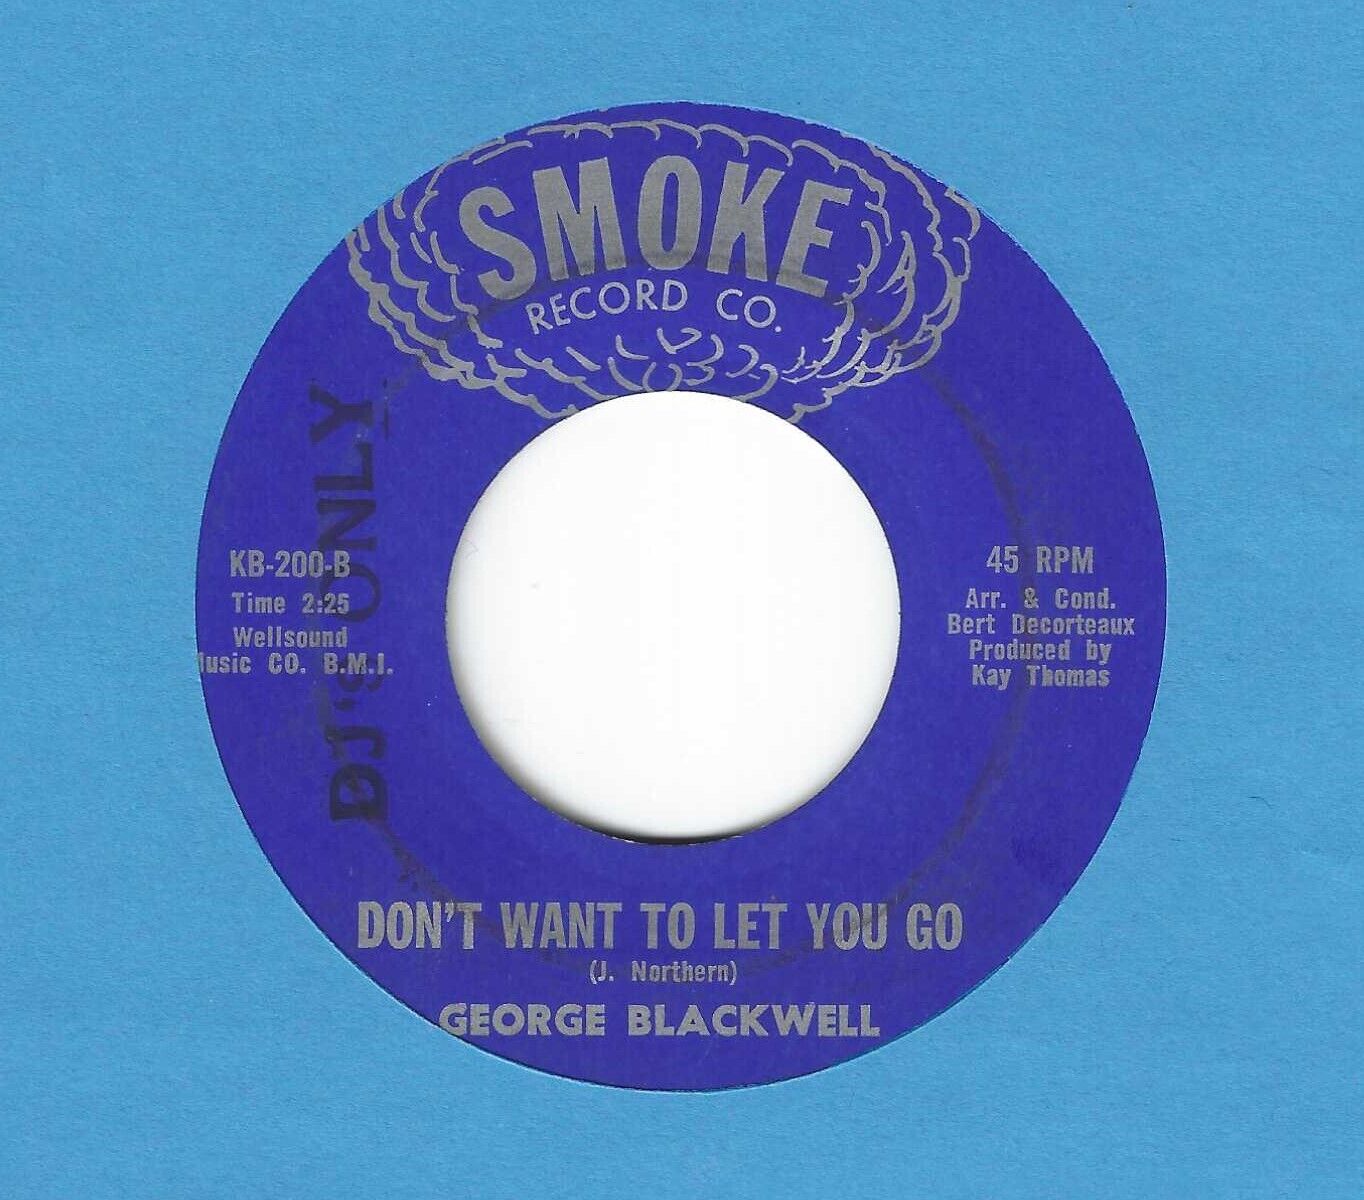 Pic 1 RARE NORTHERN SOUL 45 ON SMOKE by GEORGE BLACKWELL - "CAN'T LOSE MY HEAD"  VG+